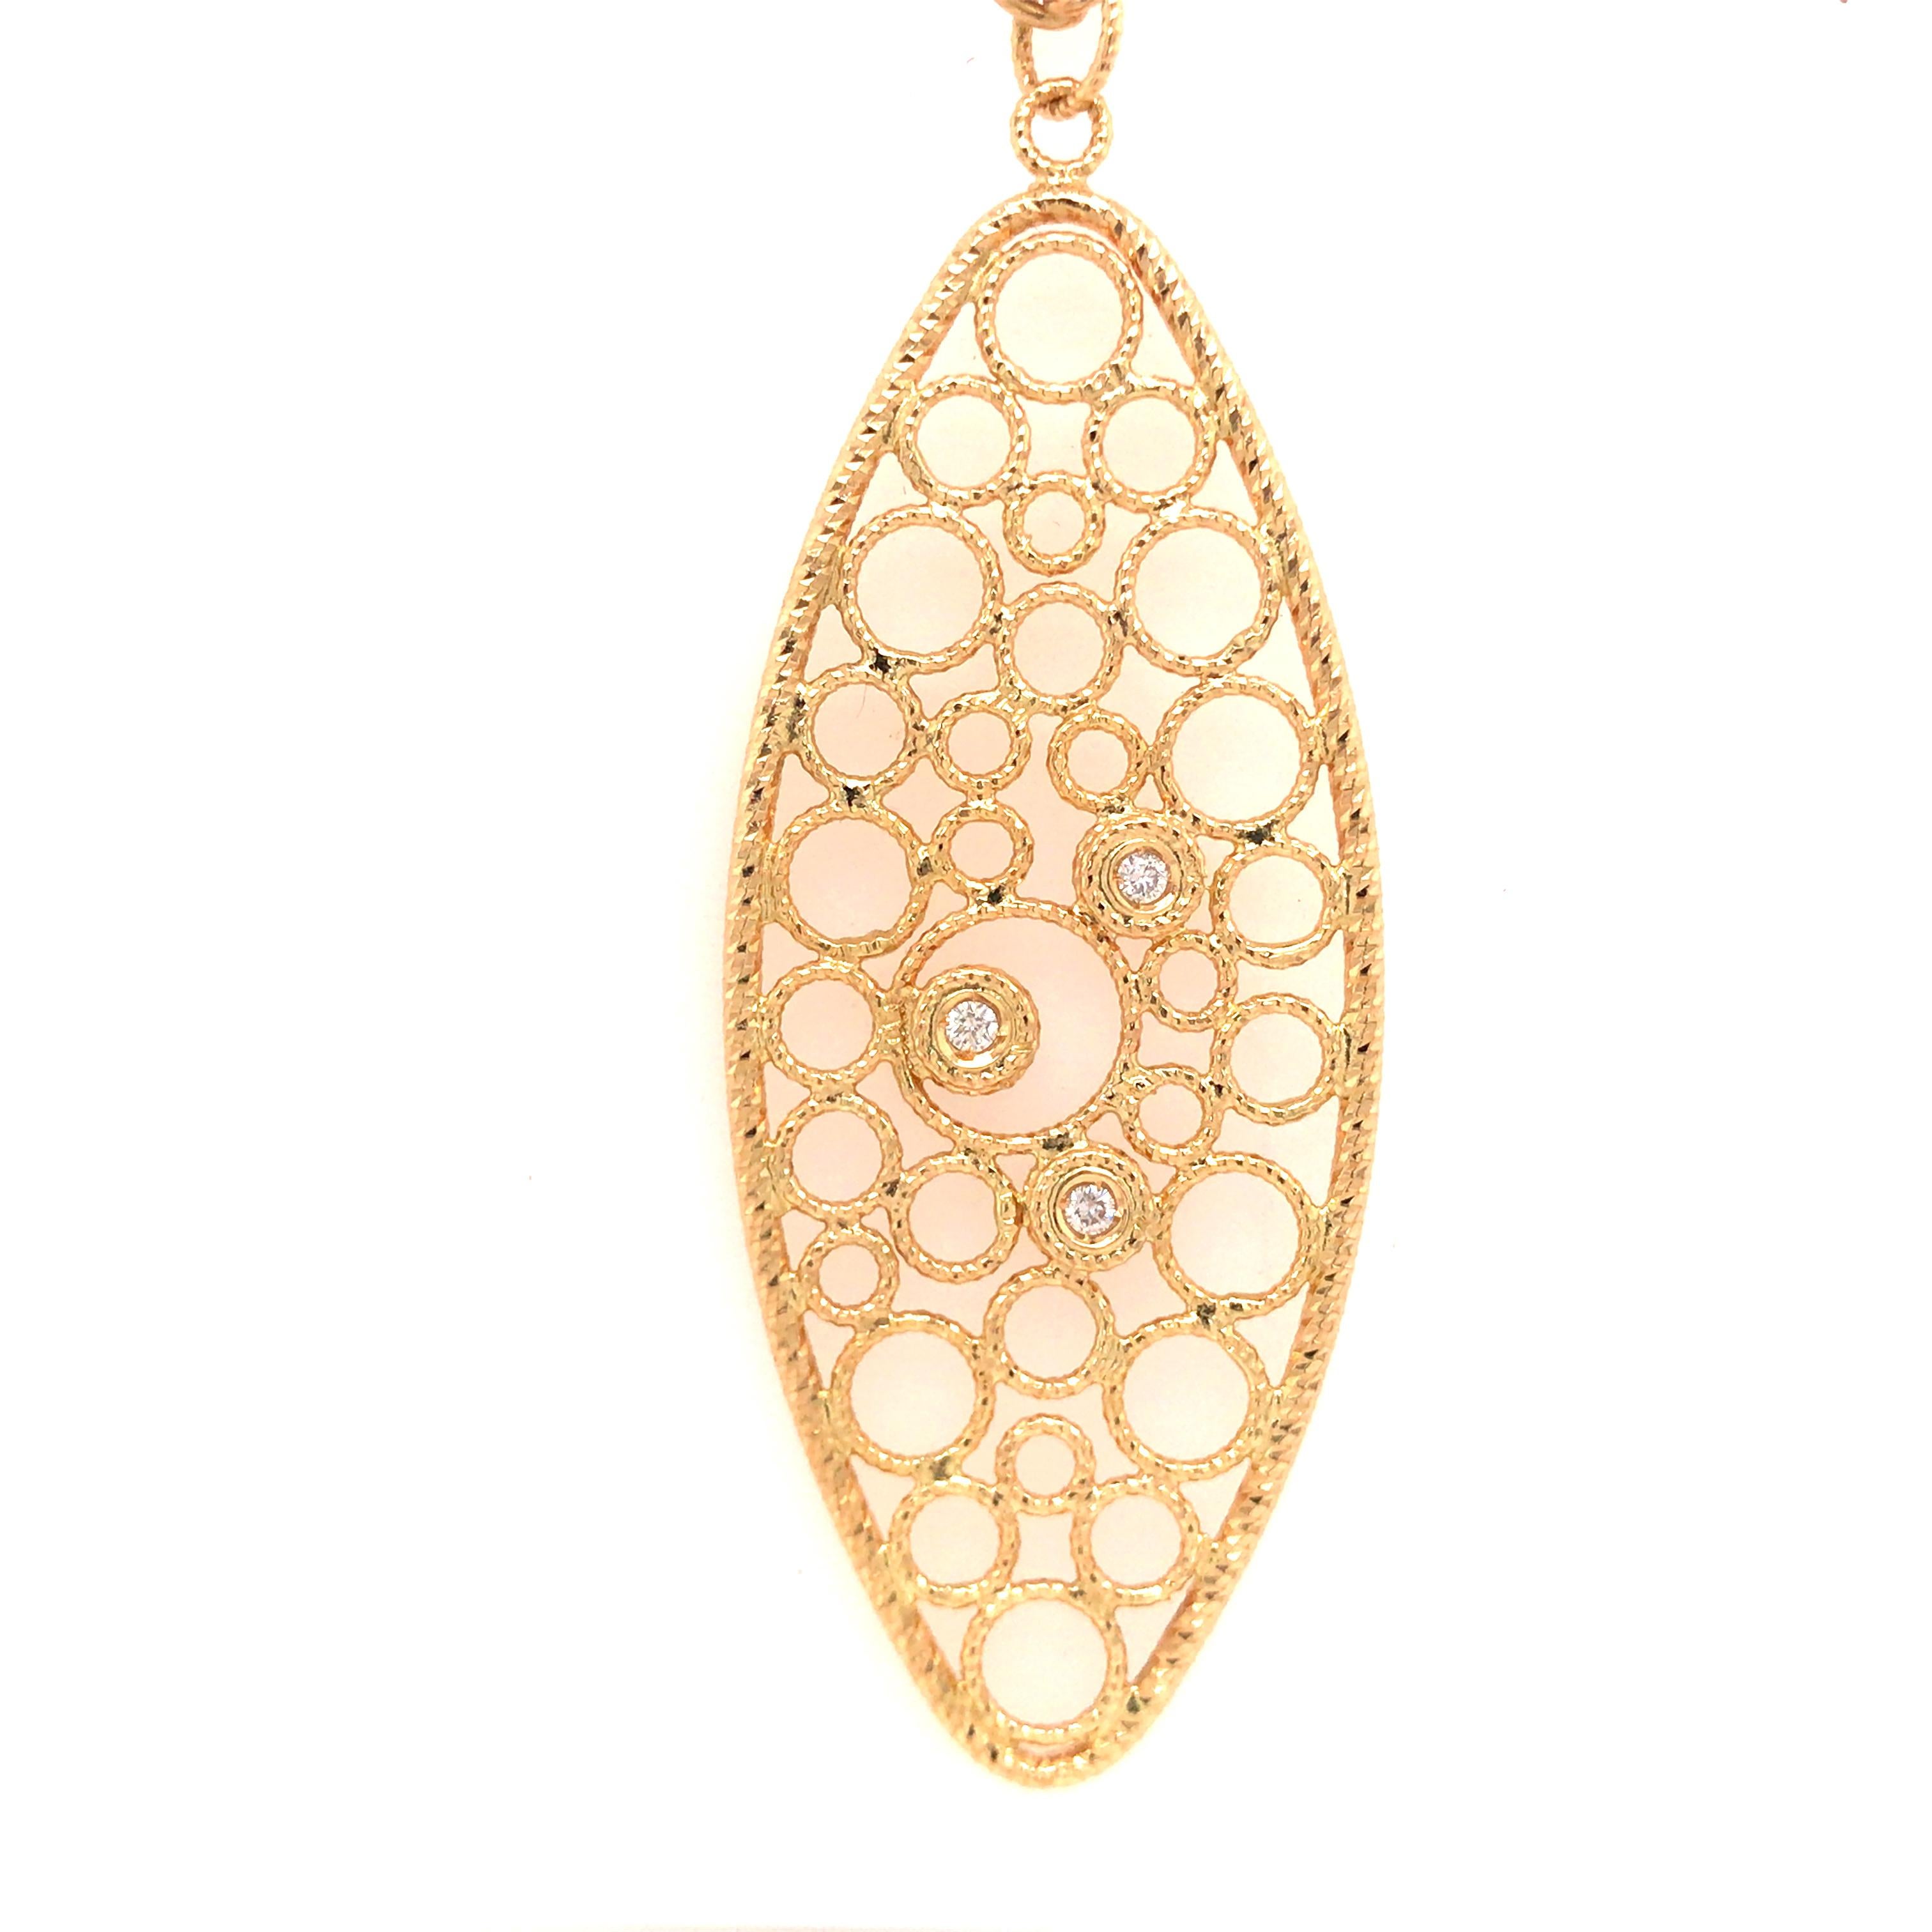 Roberto Coin Diamond Open Circle Pendant in 18K Yellow Gold.  Round Brilliant Cut Diamonds weighing 0.09 carat total weight, G-H in color and VS in clarity are expertly set.  The Pendant measures 1 1/2 inch in length, 7/8 inch in width.  The chain